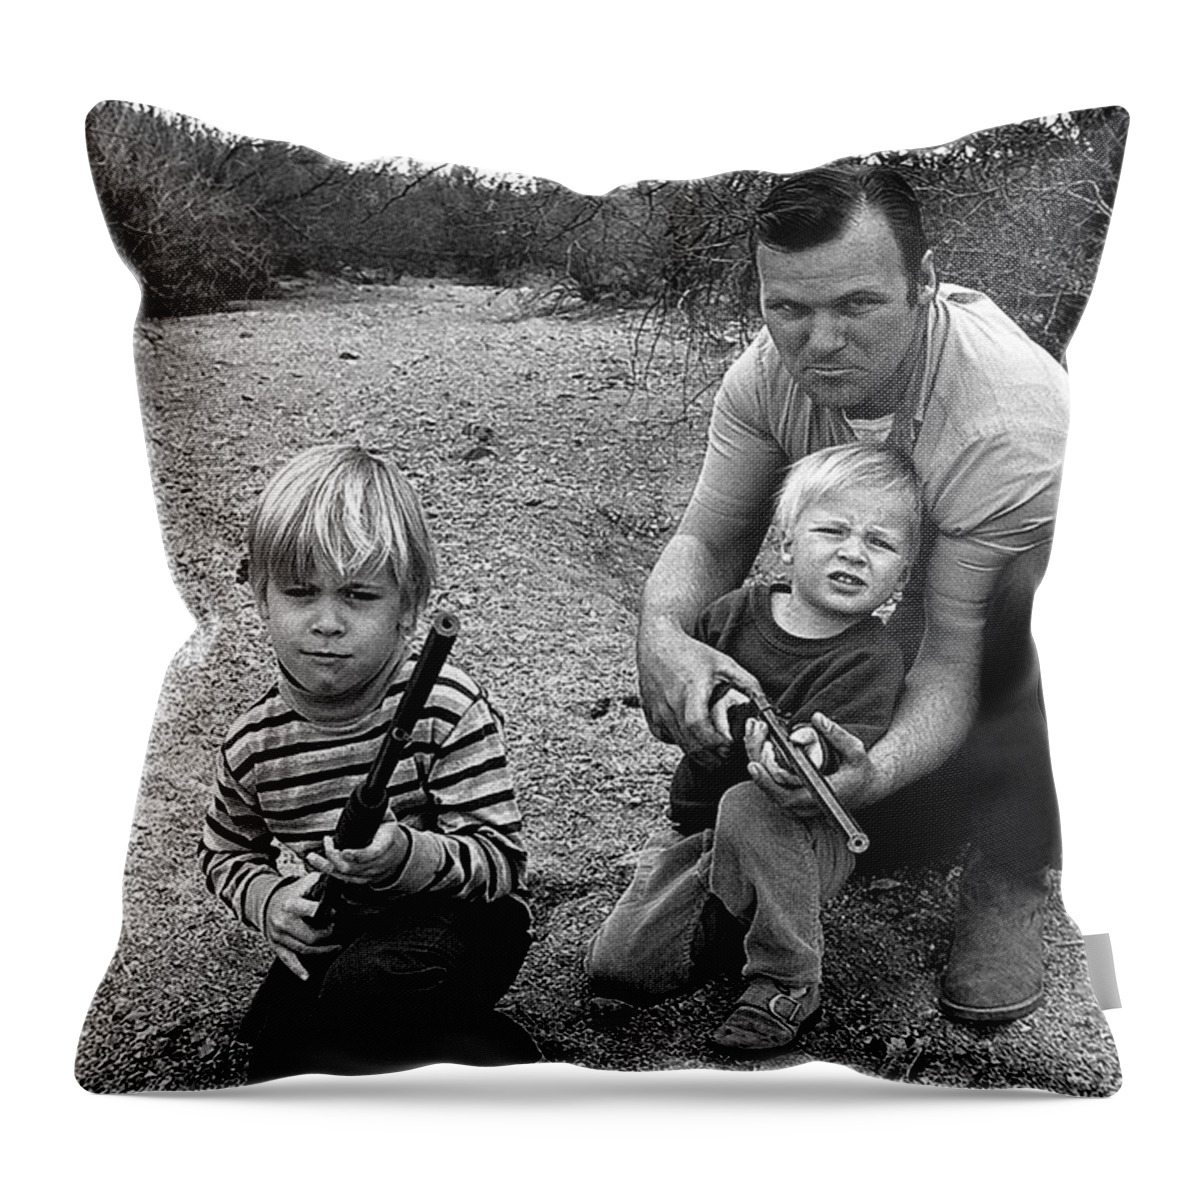 The Green Berets Homage 1968 Barry Sadler And Sons Tucson Arizona John Wayne Toy Guns Black And White Dry River Bed Throw Pillow featuring the photograph The Green Berets homage 1968 Barry Sadler and sons Tucson Arizona by David Lee Guss